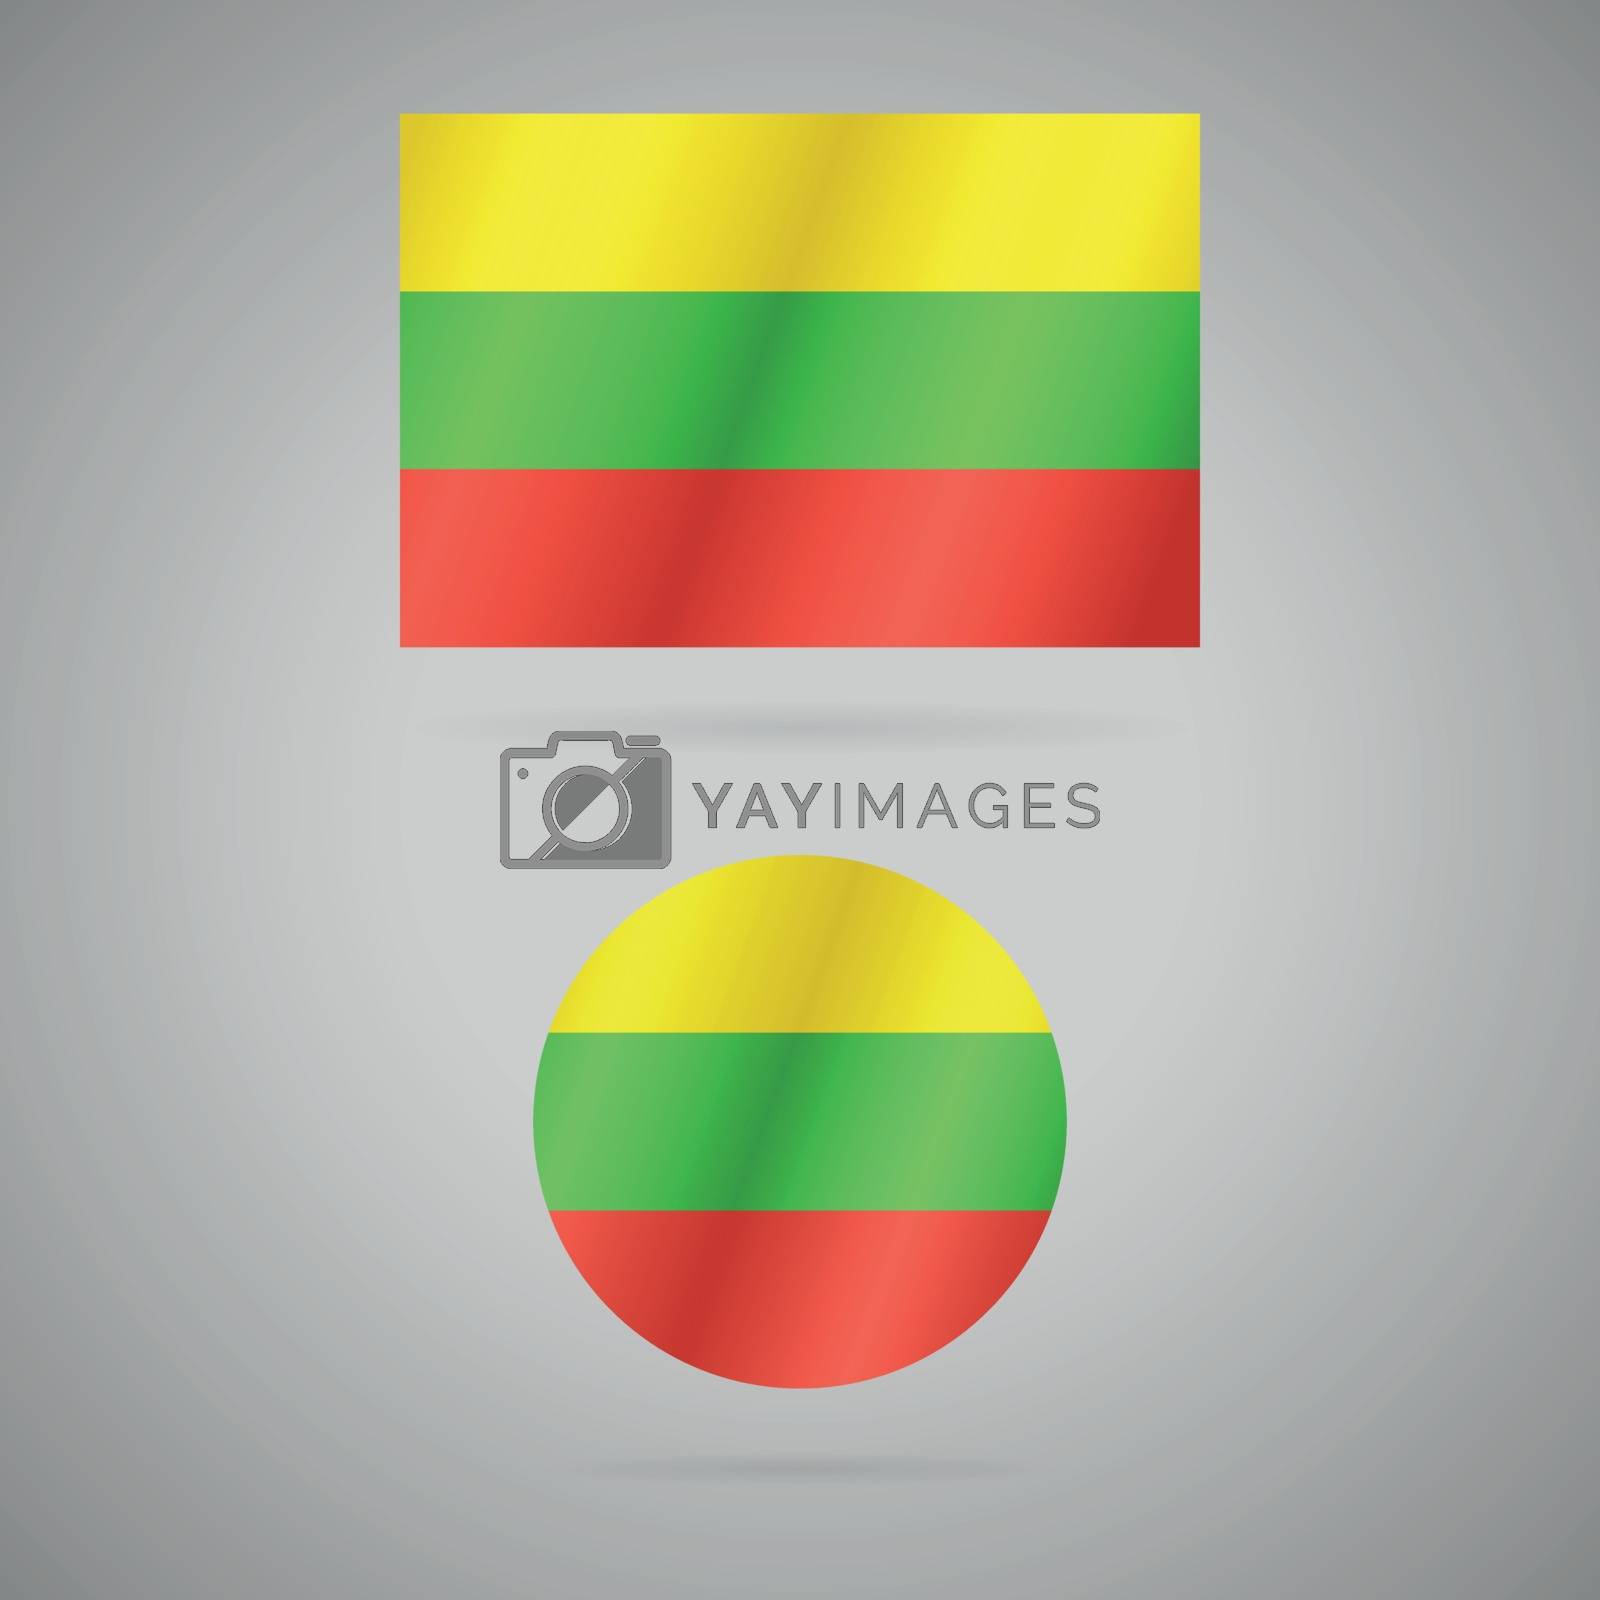 Royalty free image of Flag of Lithuania by ggebl